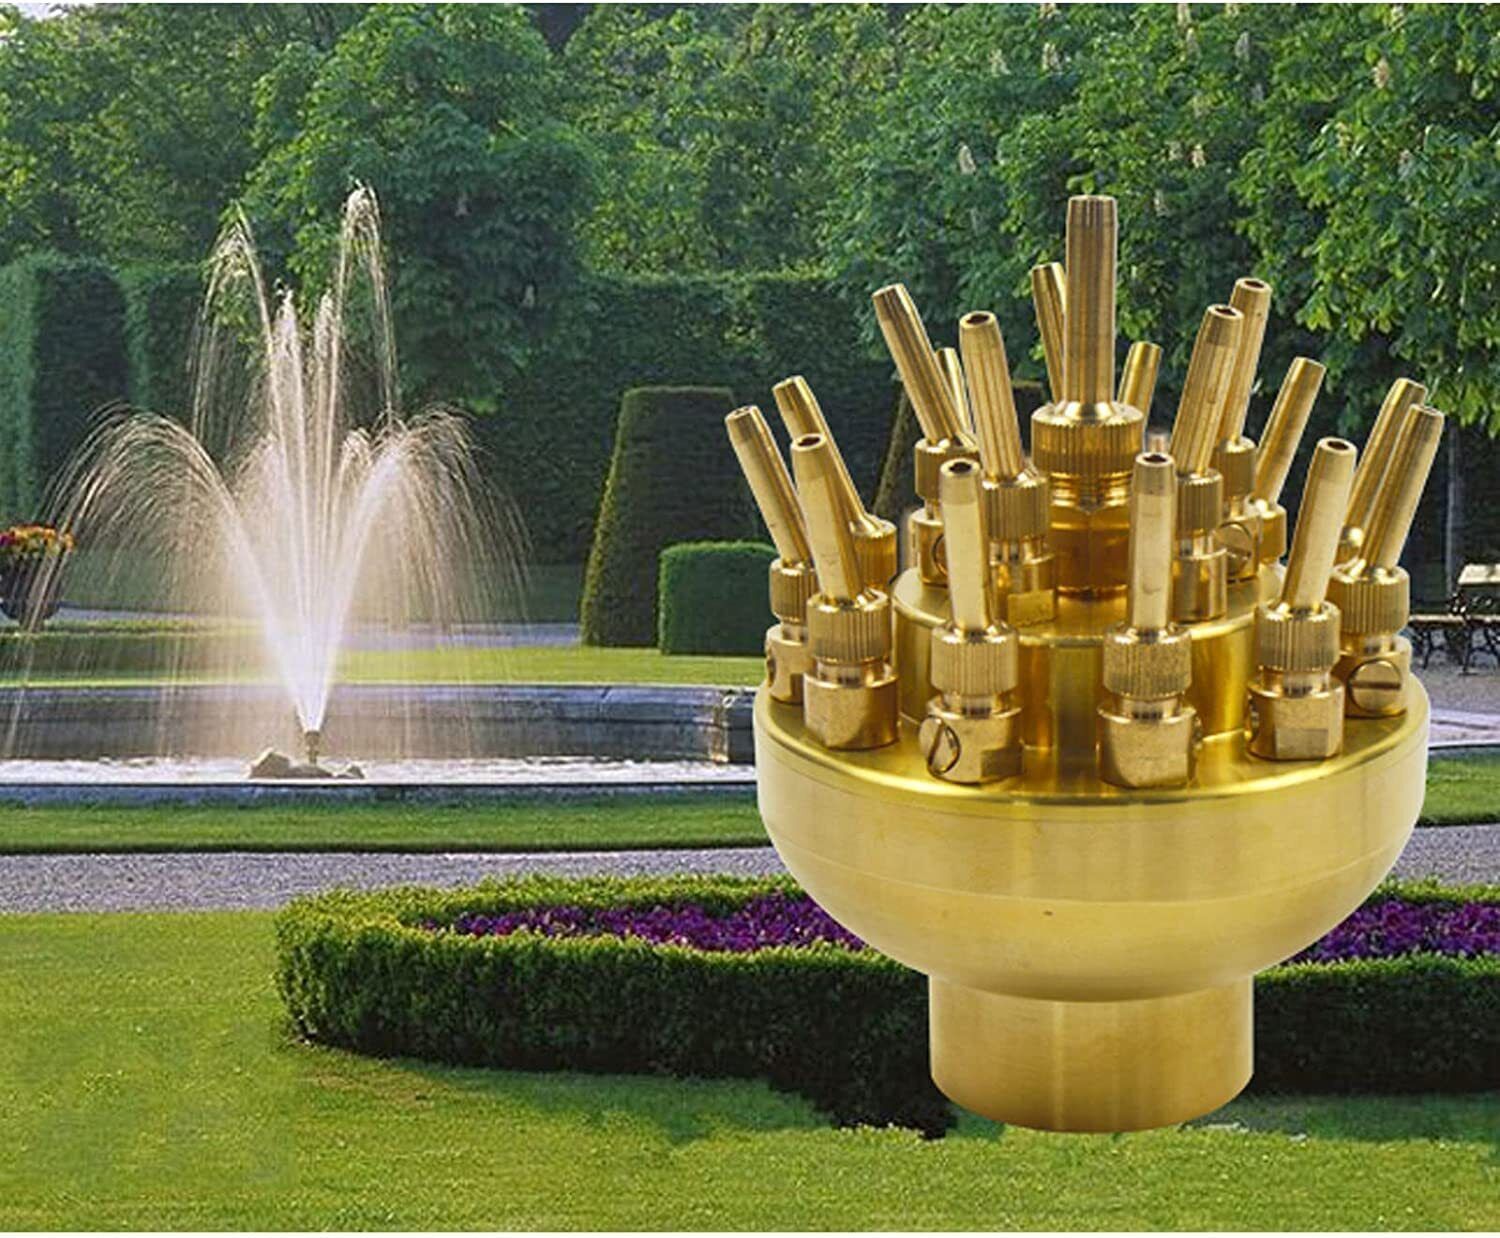 1.5" DN40 3 Layers 17 Sprinklers Adjustable Water Fountain Nozzle Brass Quality